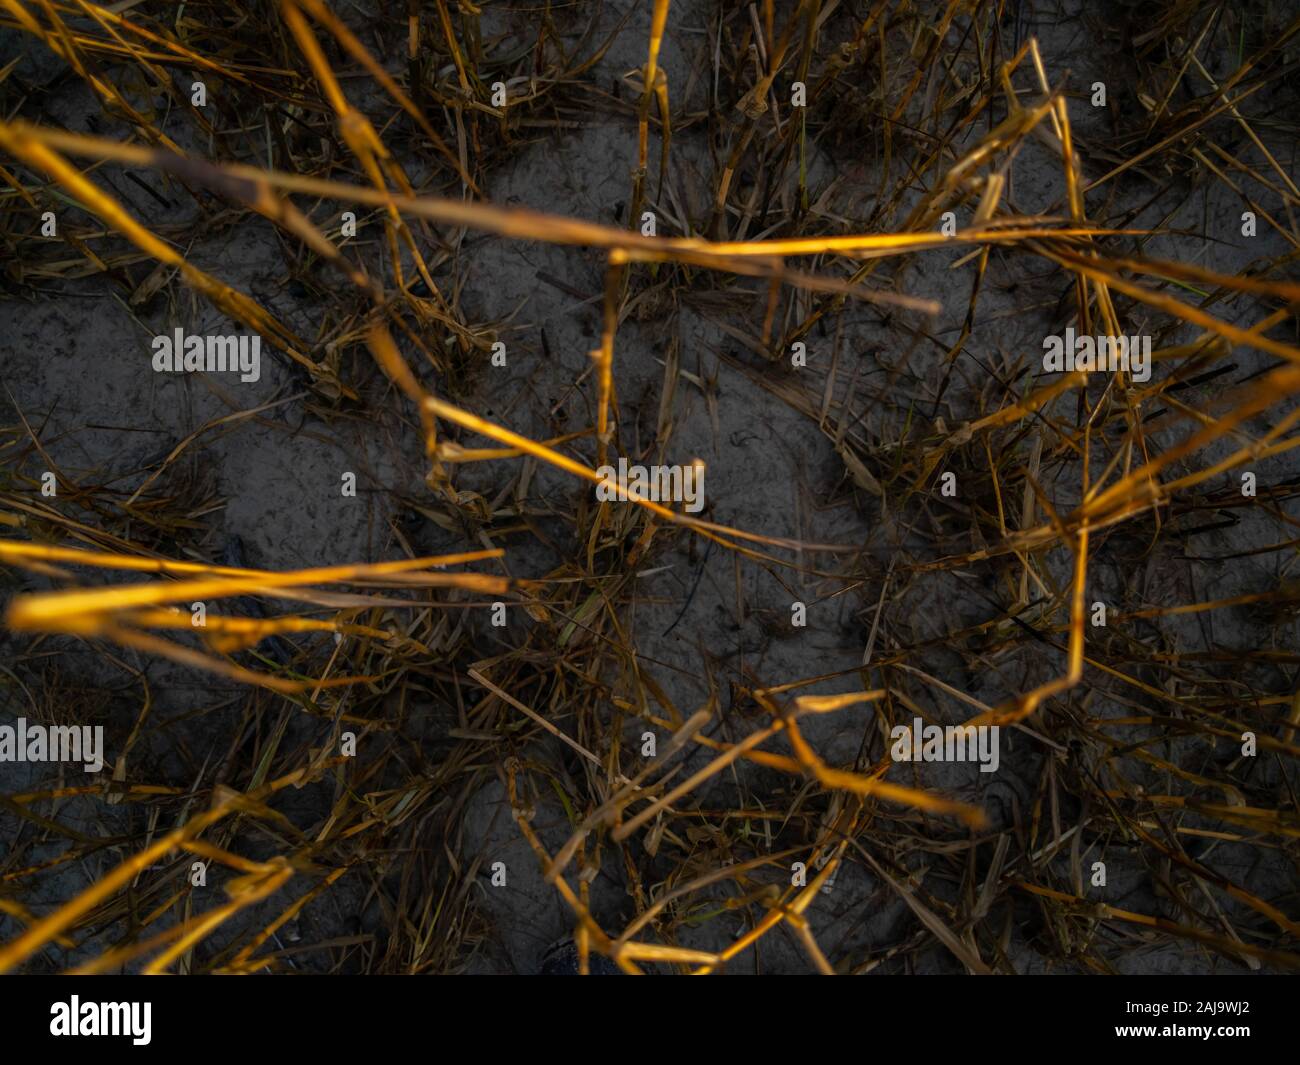 Looking Down on Dead Cord Grass in the Fall Stock Photo